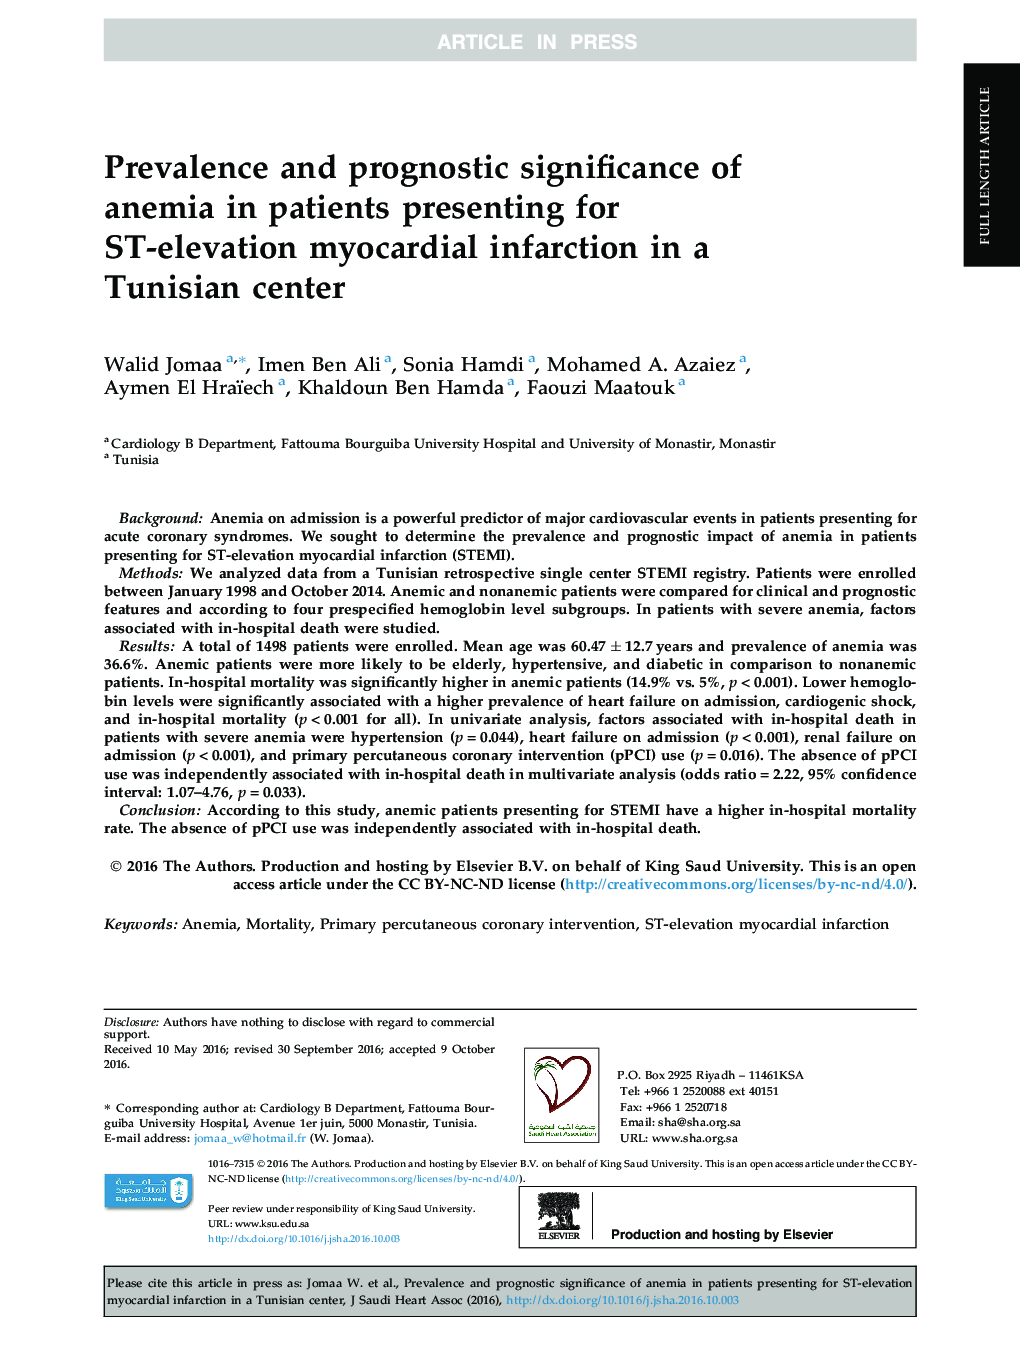 Prevalence and prognostic significance of anemia in patients presenting for ST-elevation myocardial infarction in a Tunisian center